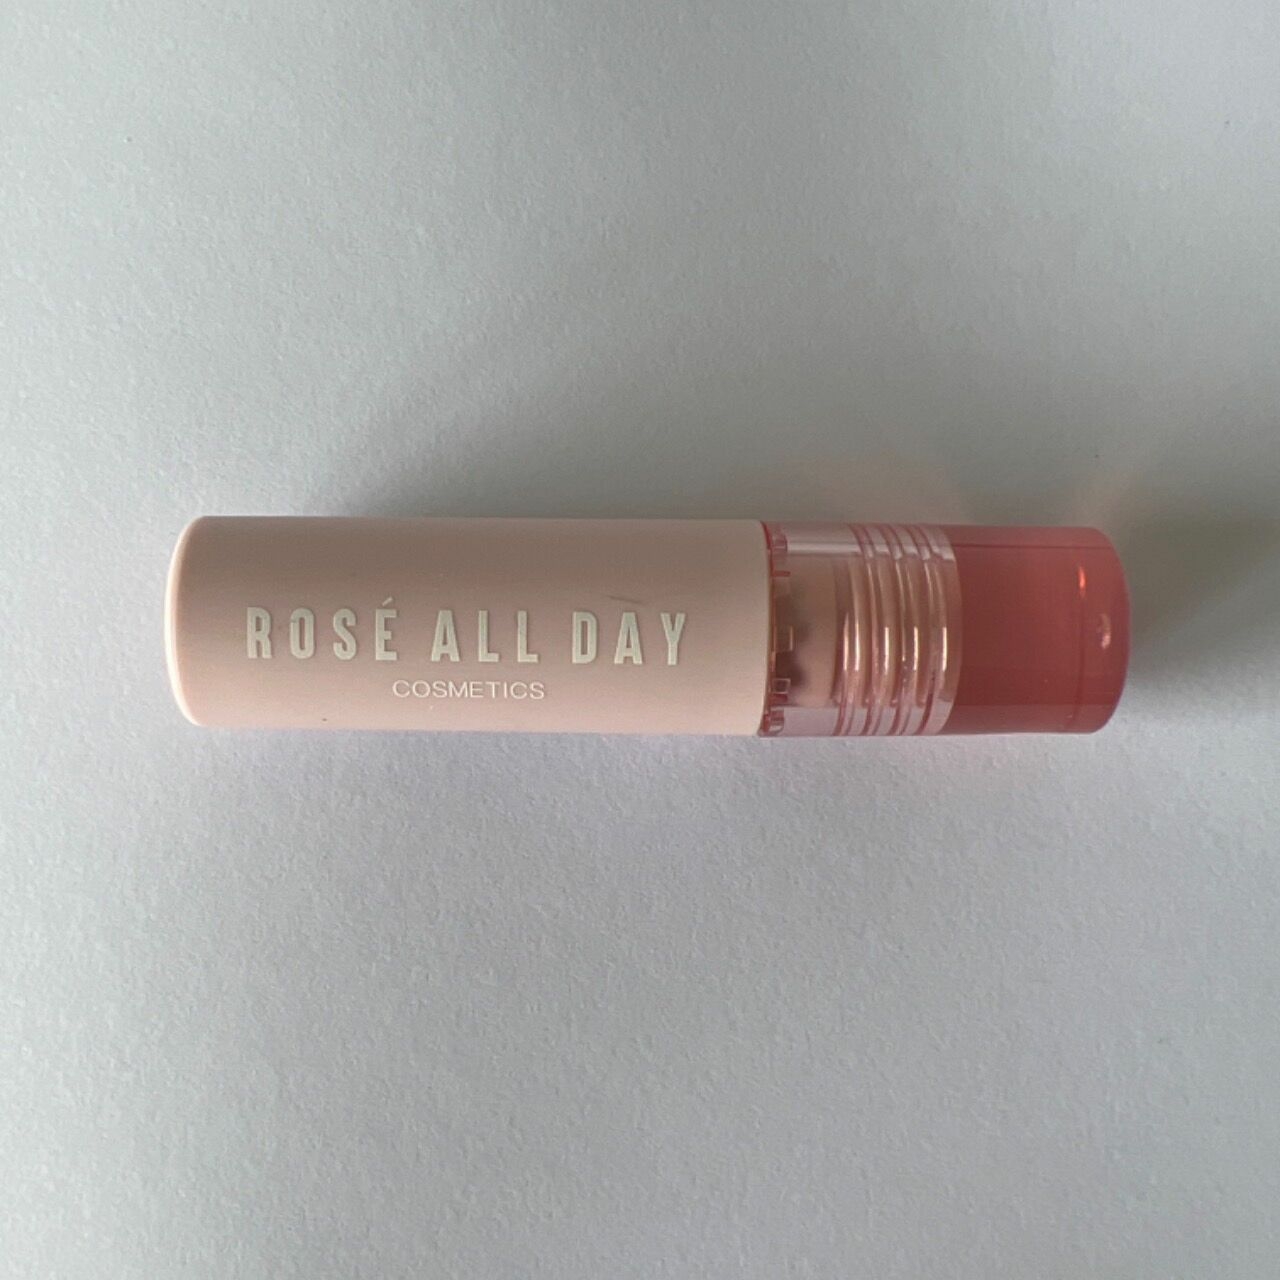 Rose All Day Plush Lip Tint Someberry To Love